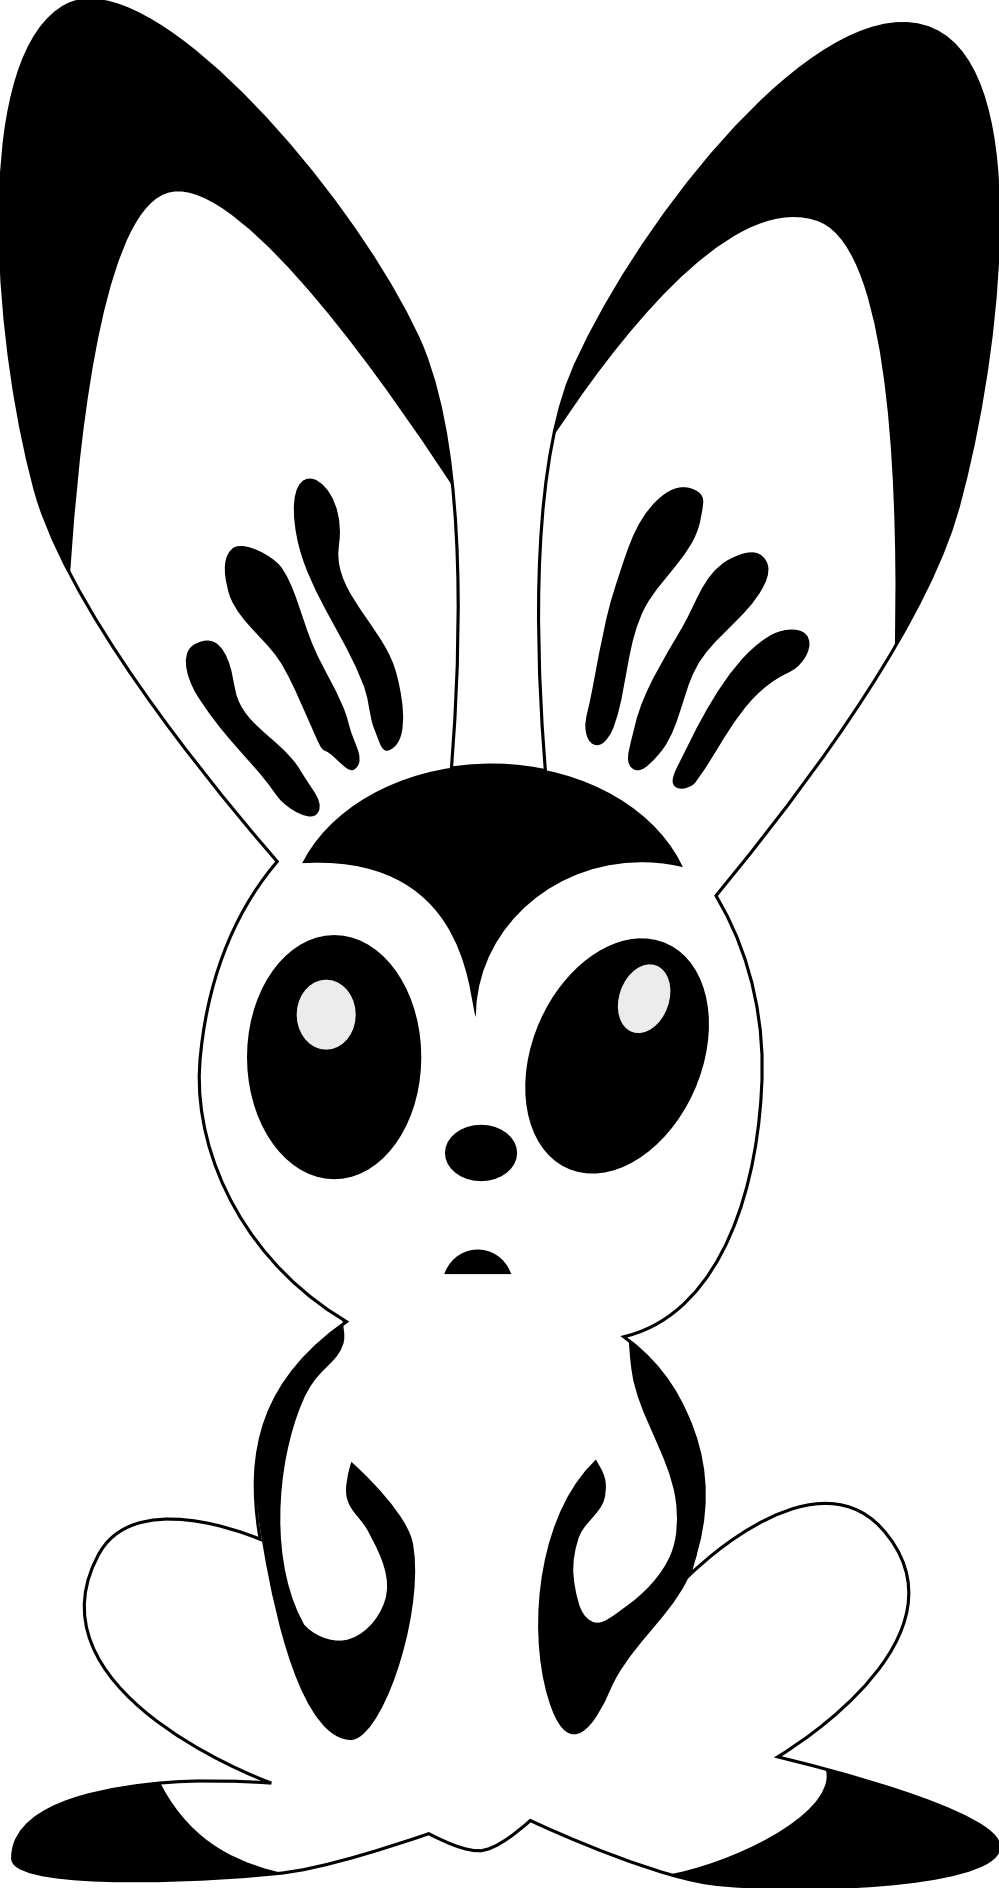 Rabbit Clipart Black And White | Camera Webfreind